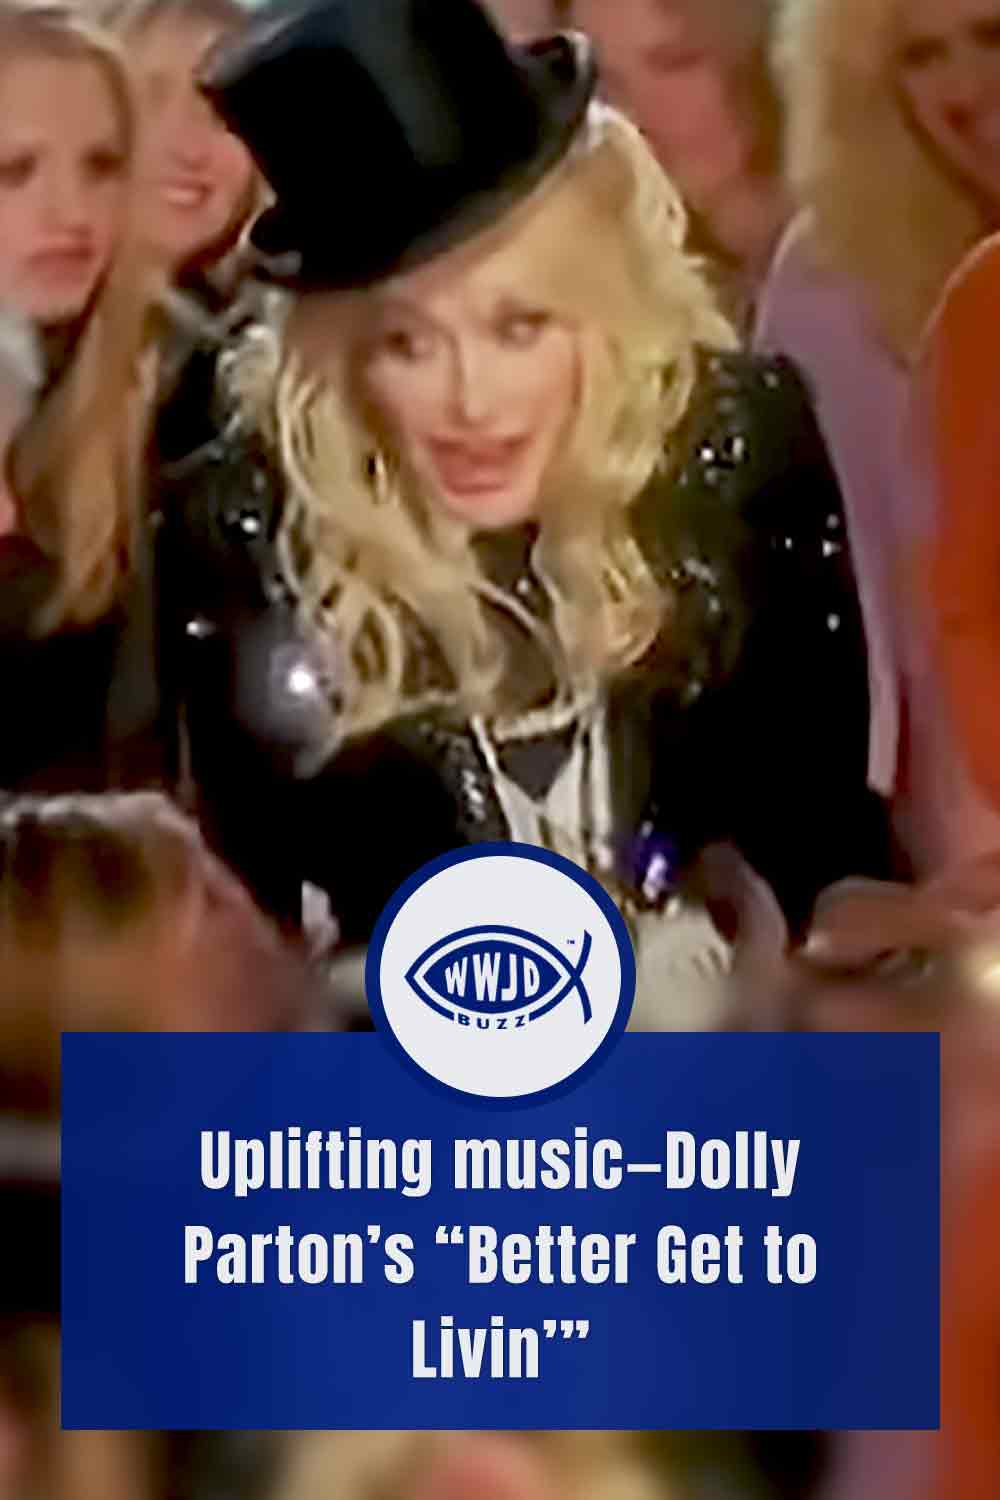 Uplifting music—Dolly Parton’s “Better Get to Livin’”